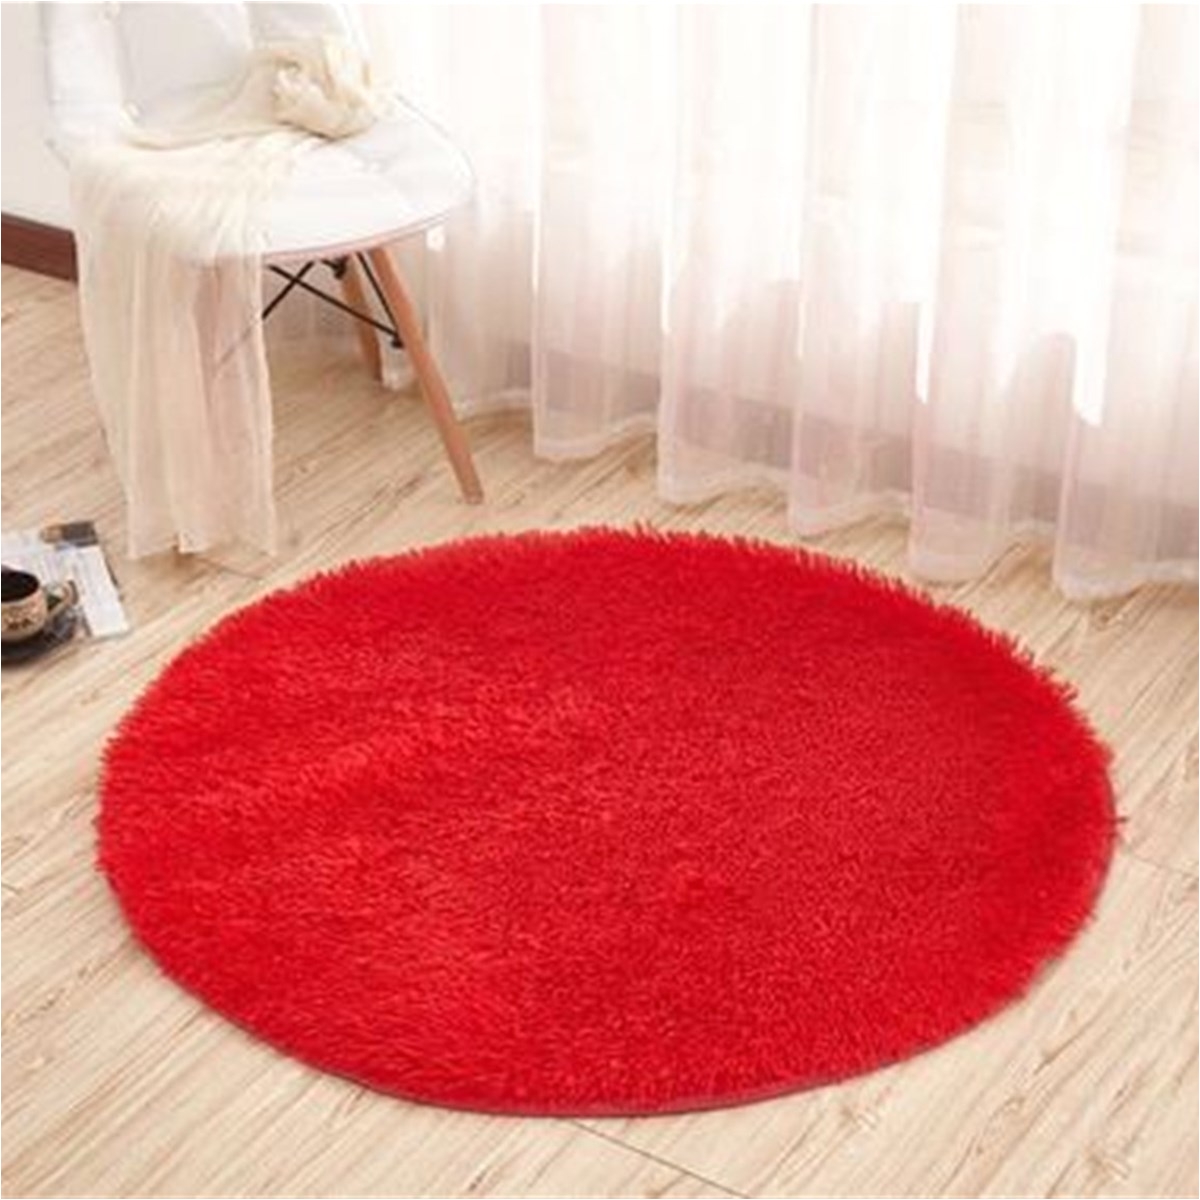 fashion red floor mats modern shaggy round rugs carpets long hair faux fur living room bedroom carpet rug for home yoga mat in carpet from home garden on